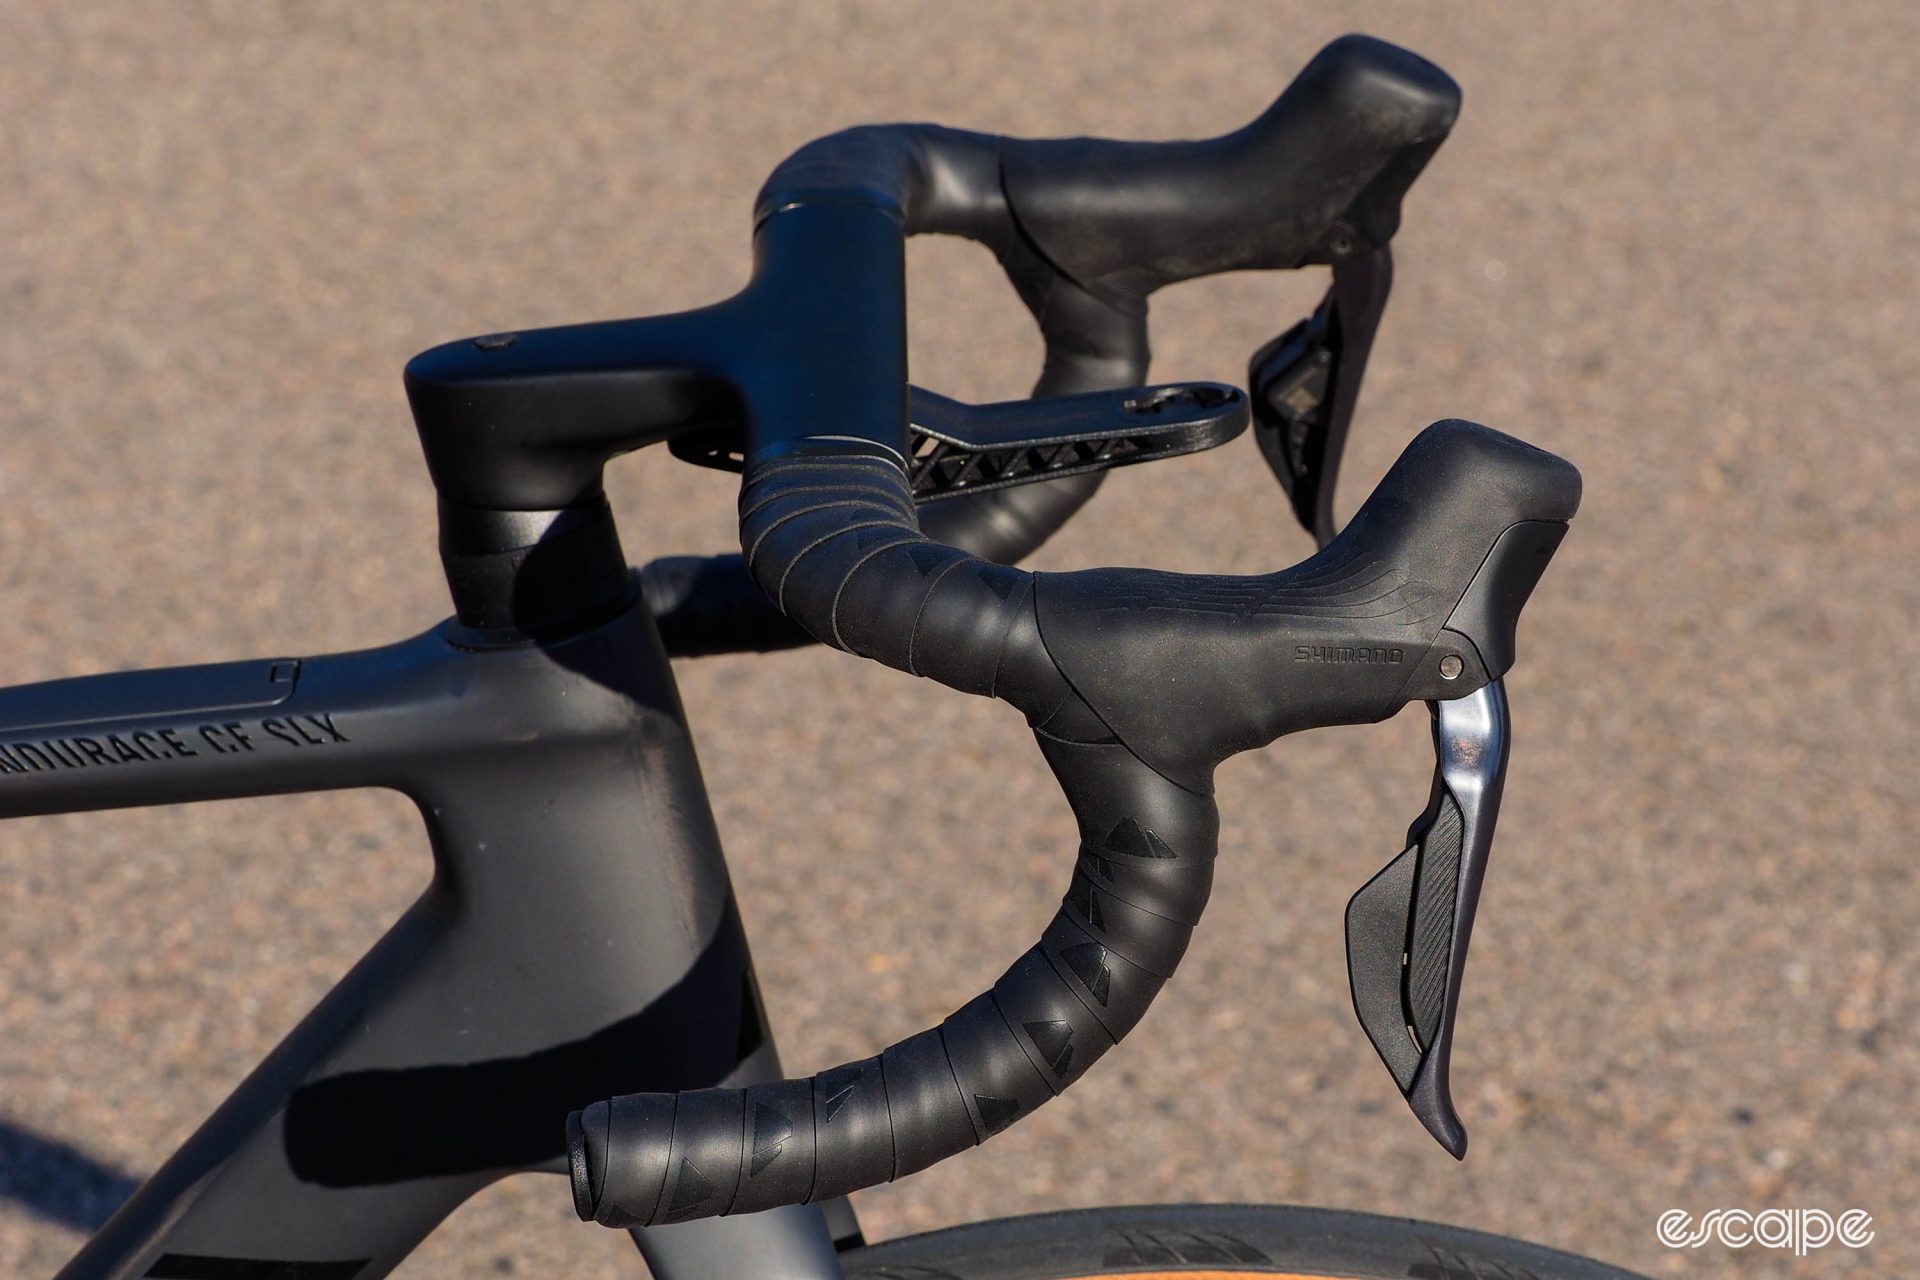 The Canyon CP0018 Aerocockpit has a long reach and deep drops. It's covered in cushy, grippy bar tape and is comfortable, if you like long/deep reach and drop.